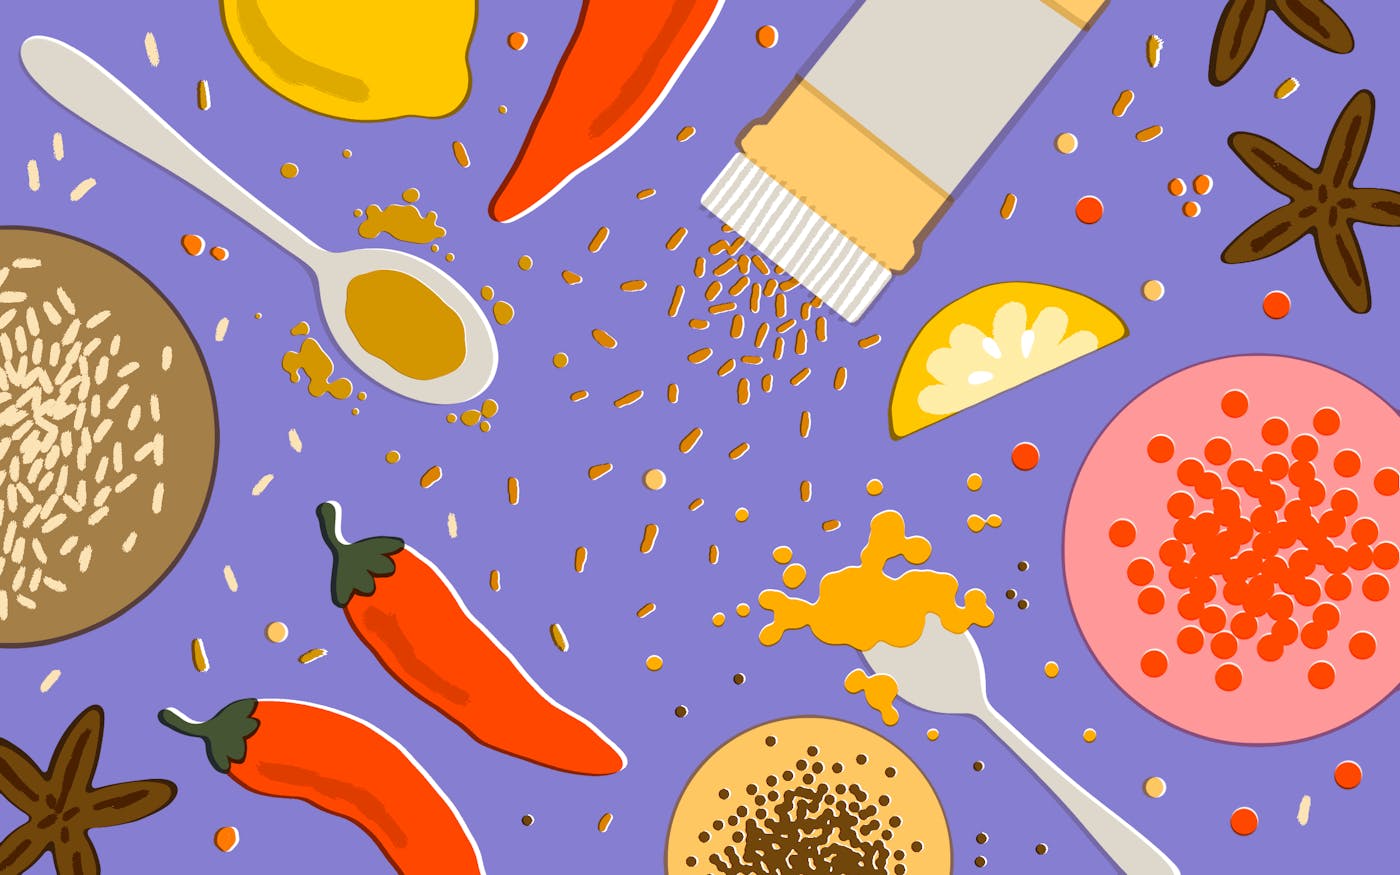 https://img.texasmonthly.com/2023/08/SPICES_ANIMATION.gif?auto=compress&crop=faces&fit=crop&fm=jpg&h=1400&ixlib=php-3.3.1&q=45&w=1400